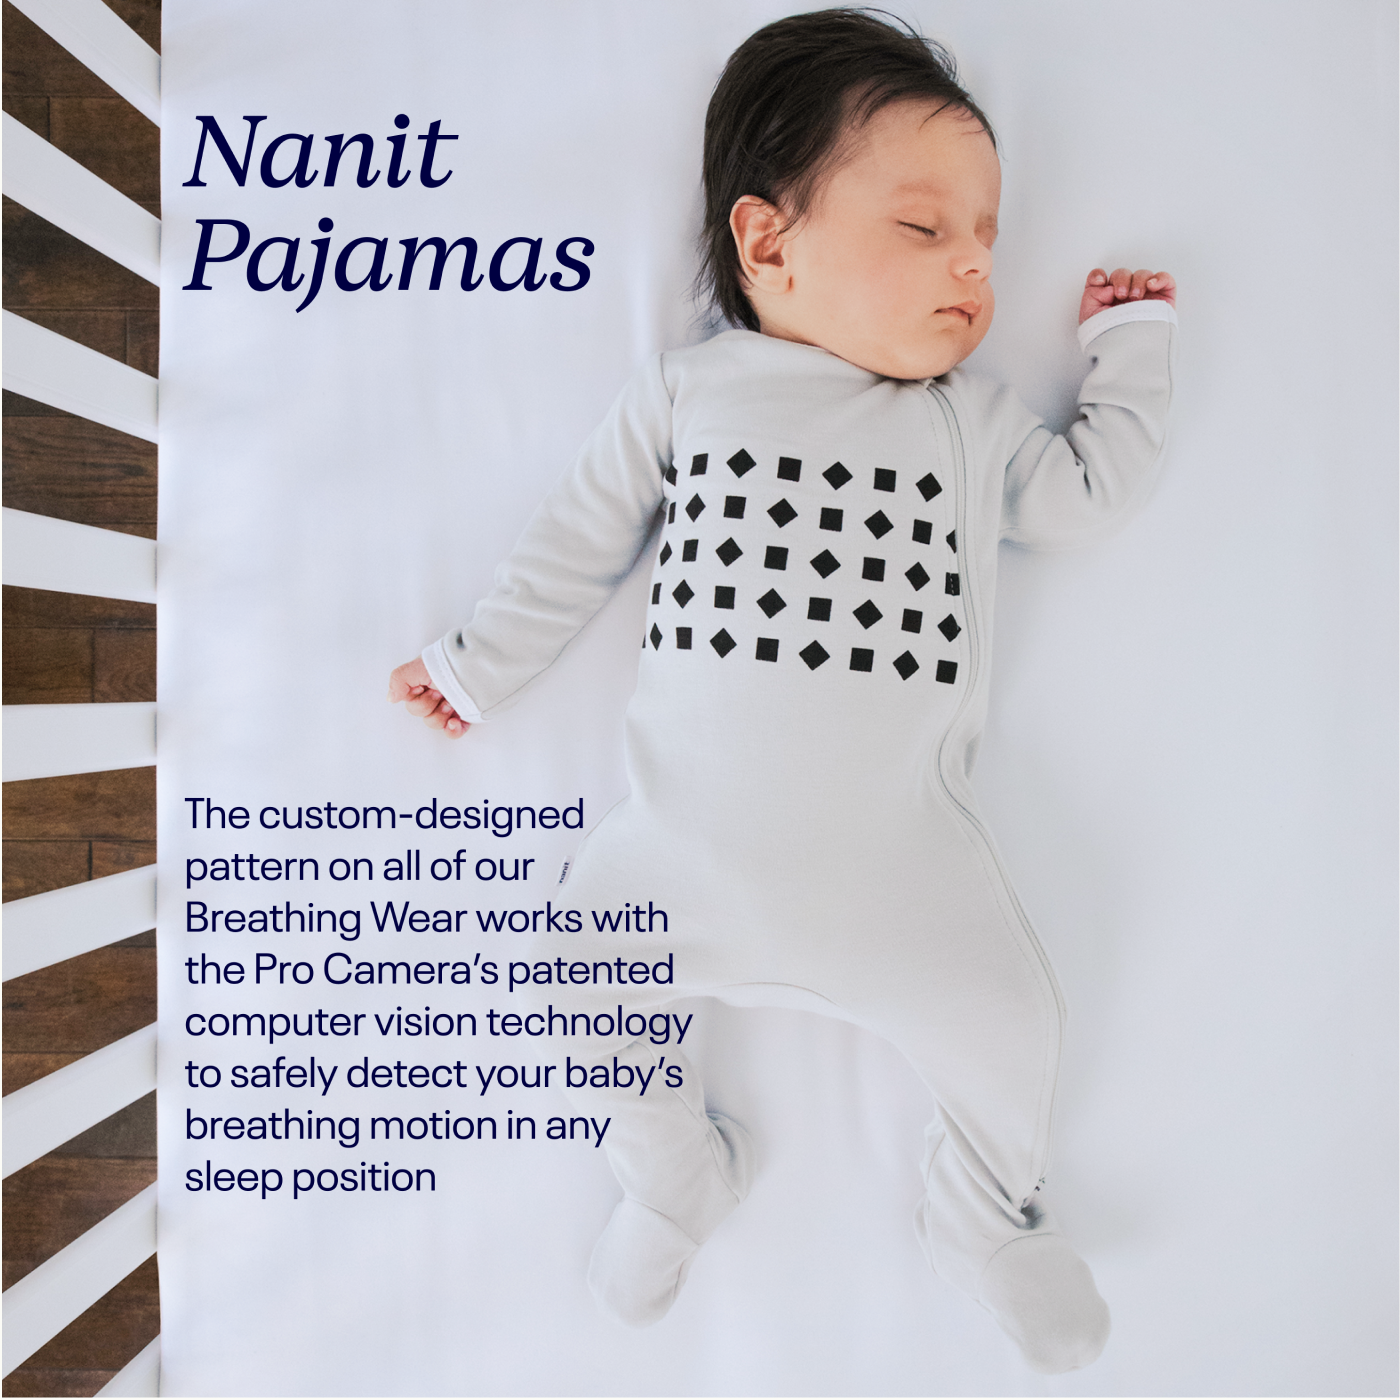 Baby sleeping in gray pajamas - works with Pro Camera's patented computer vision technology to detect baby's breathing motion